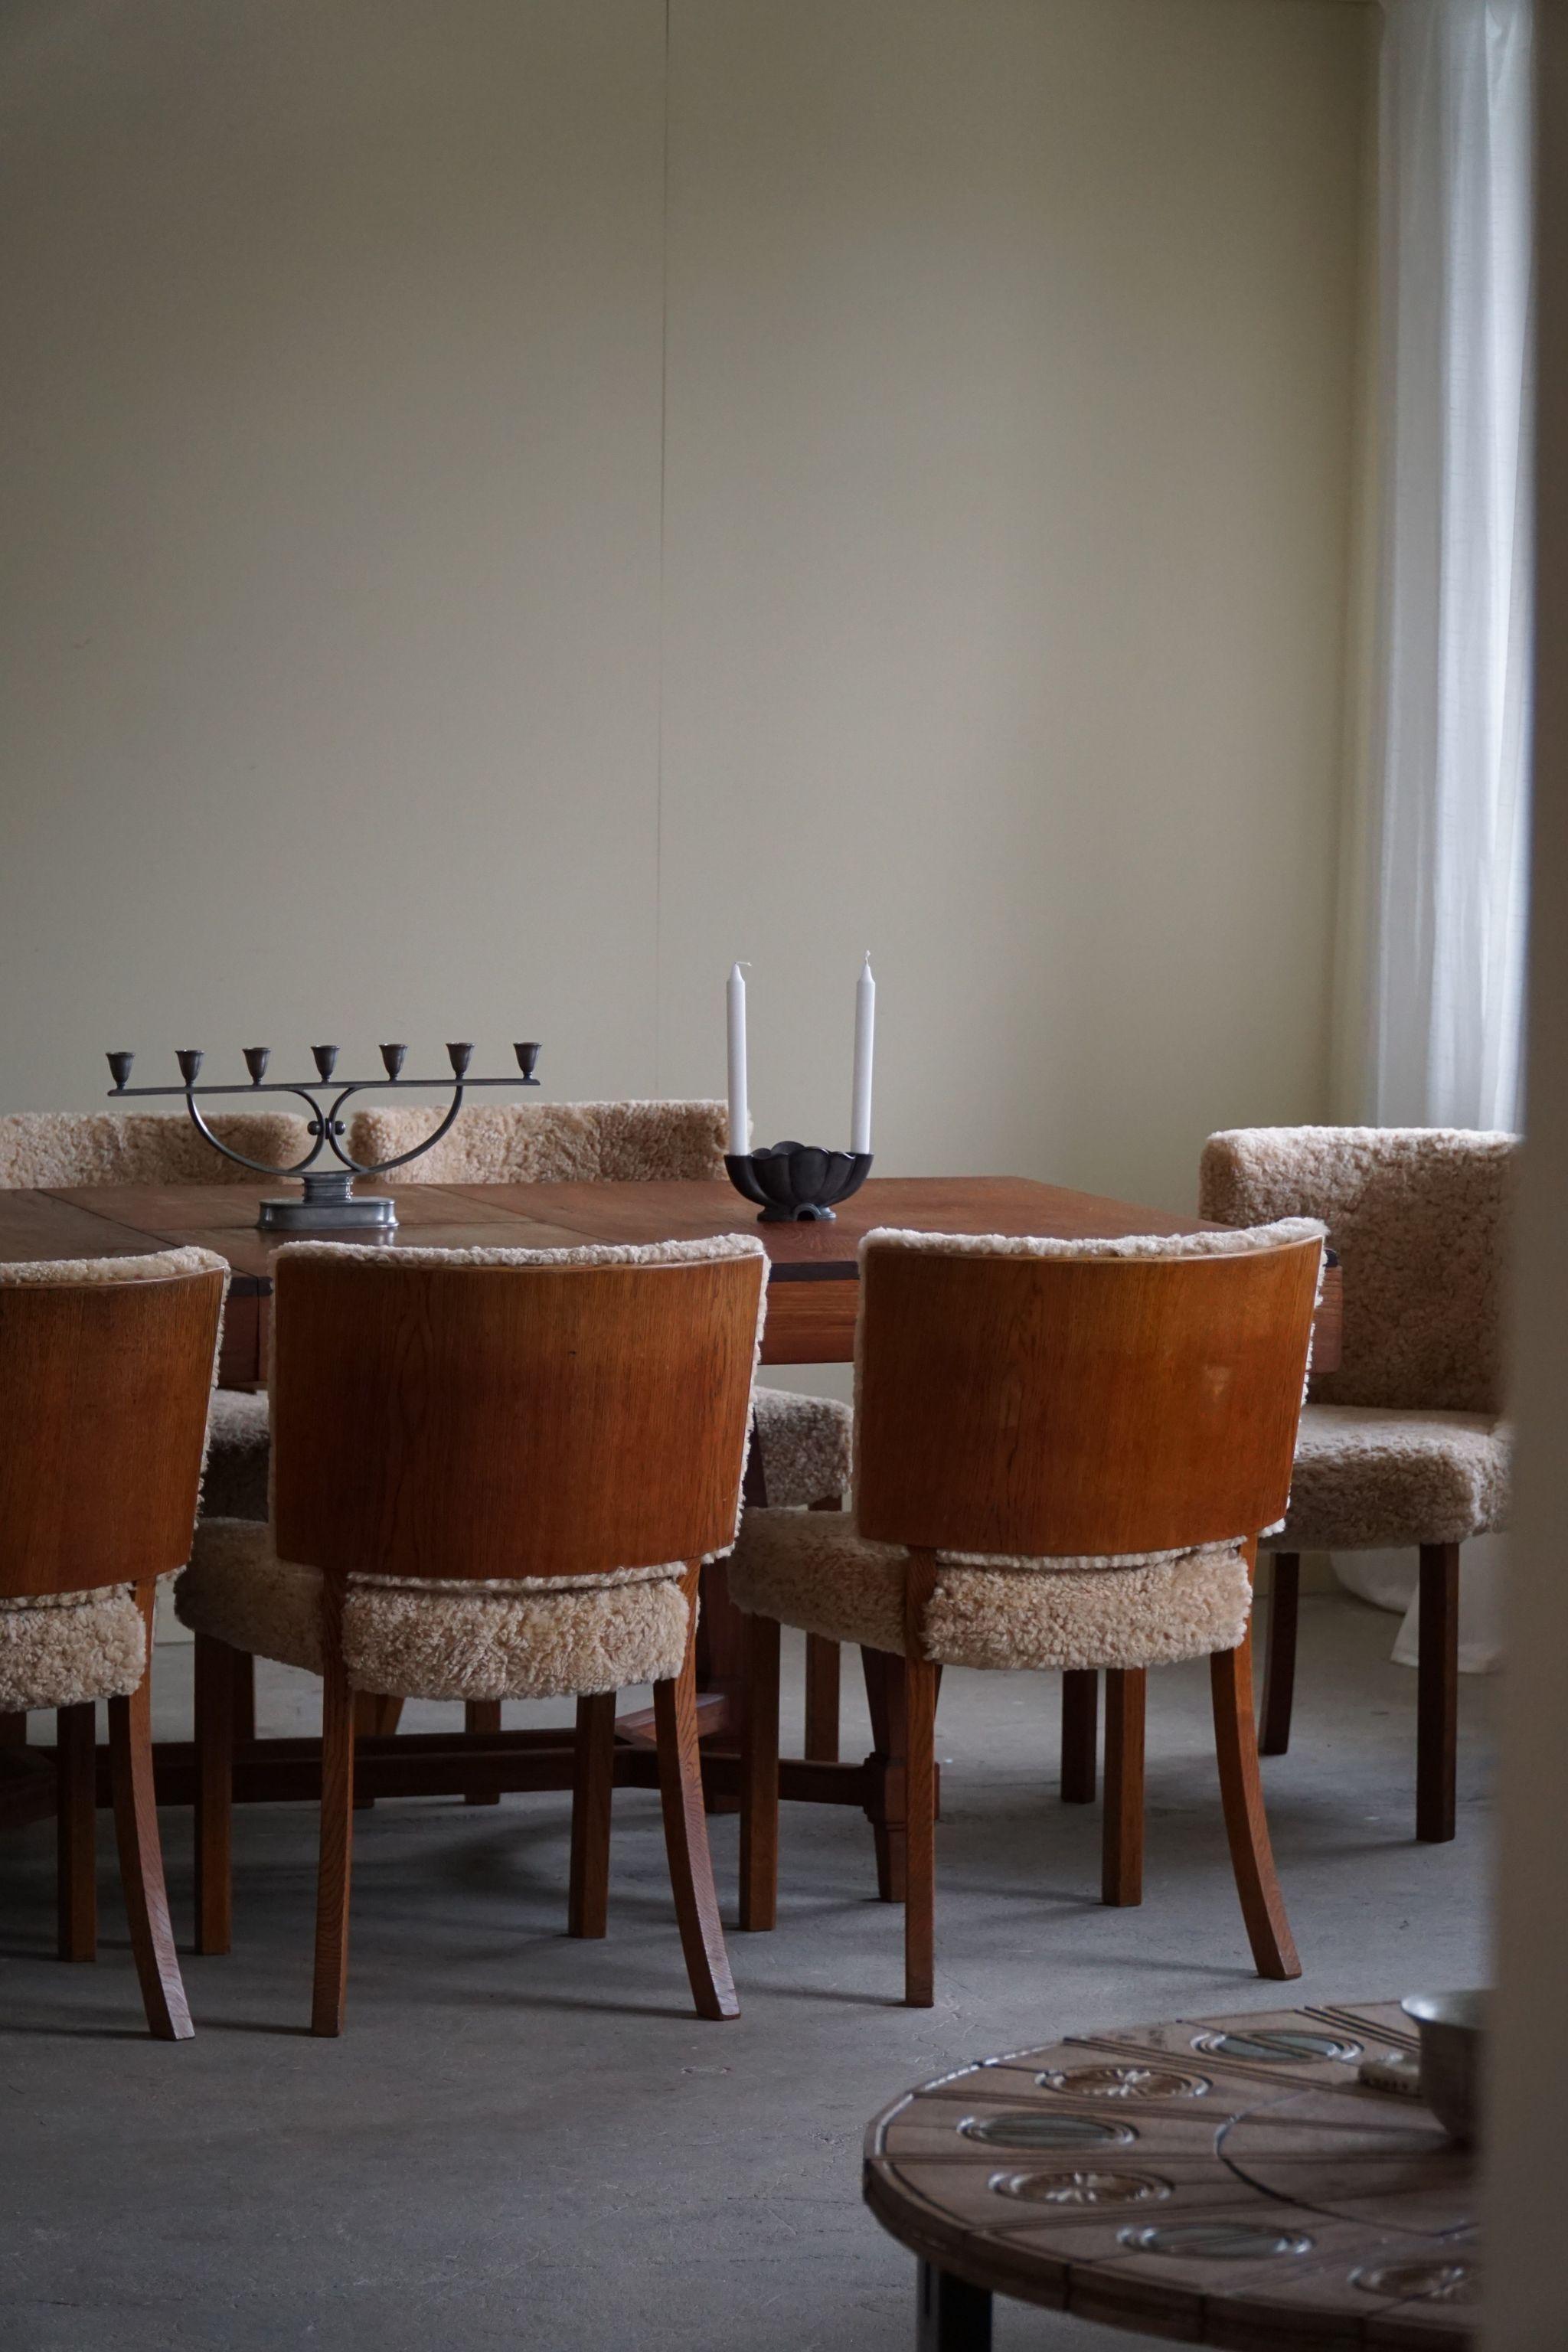 20th Century A set of 6 Dining Chairs in Oak and Lambswool, Danish Modern, Kaj Gottlob, 1950s For Sale